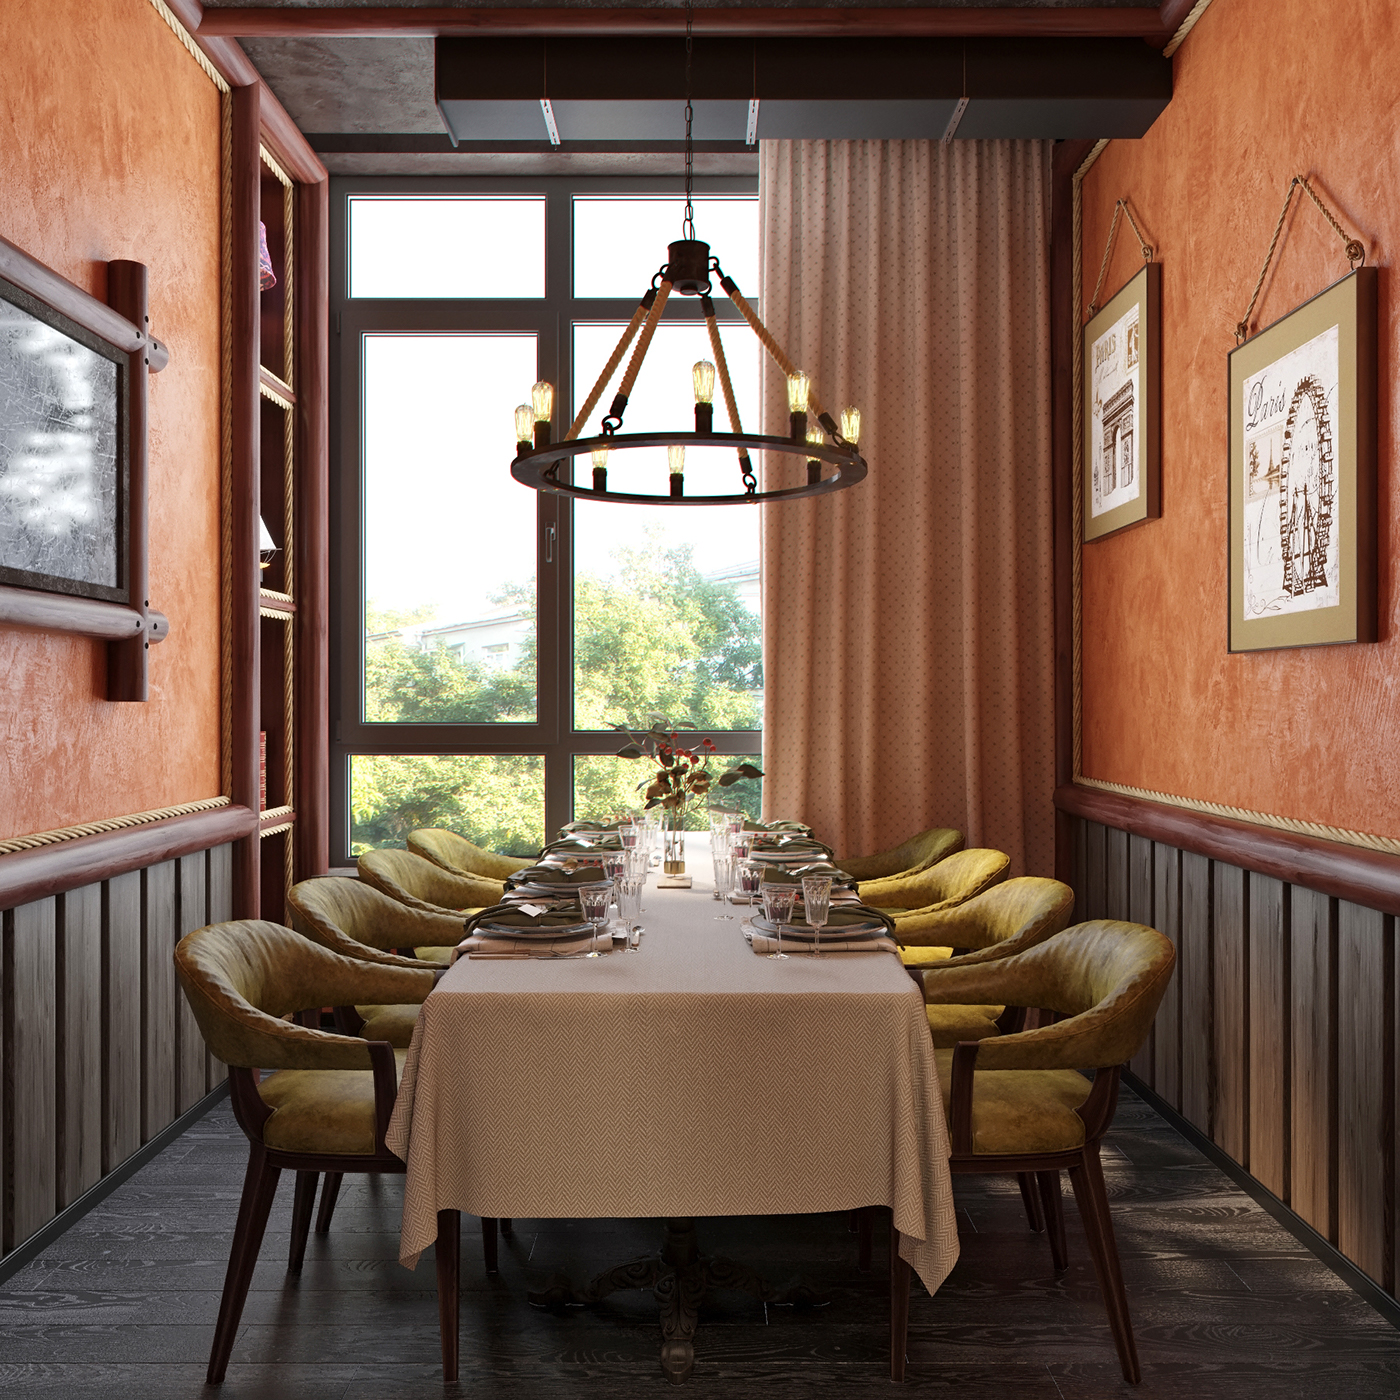 Private room in restaurant on Behance